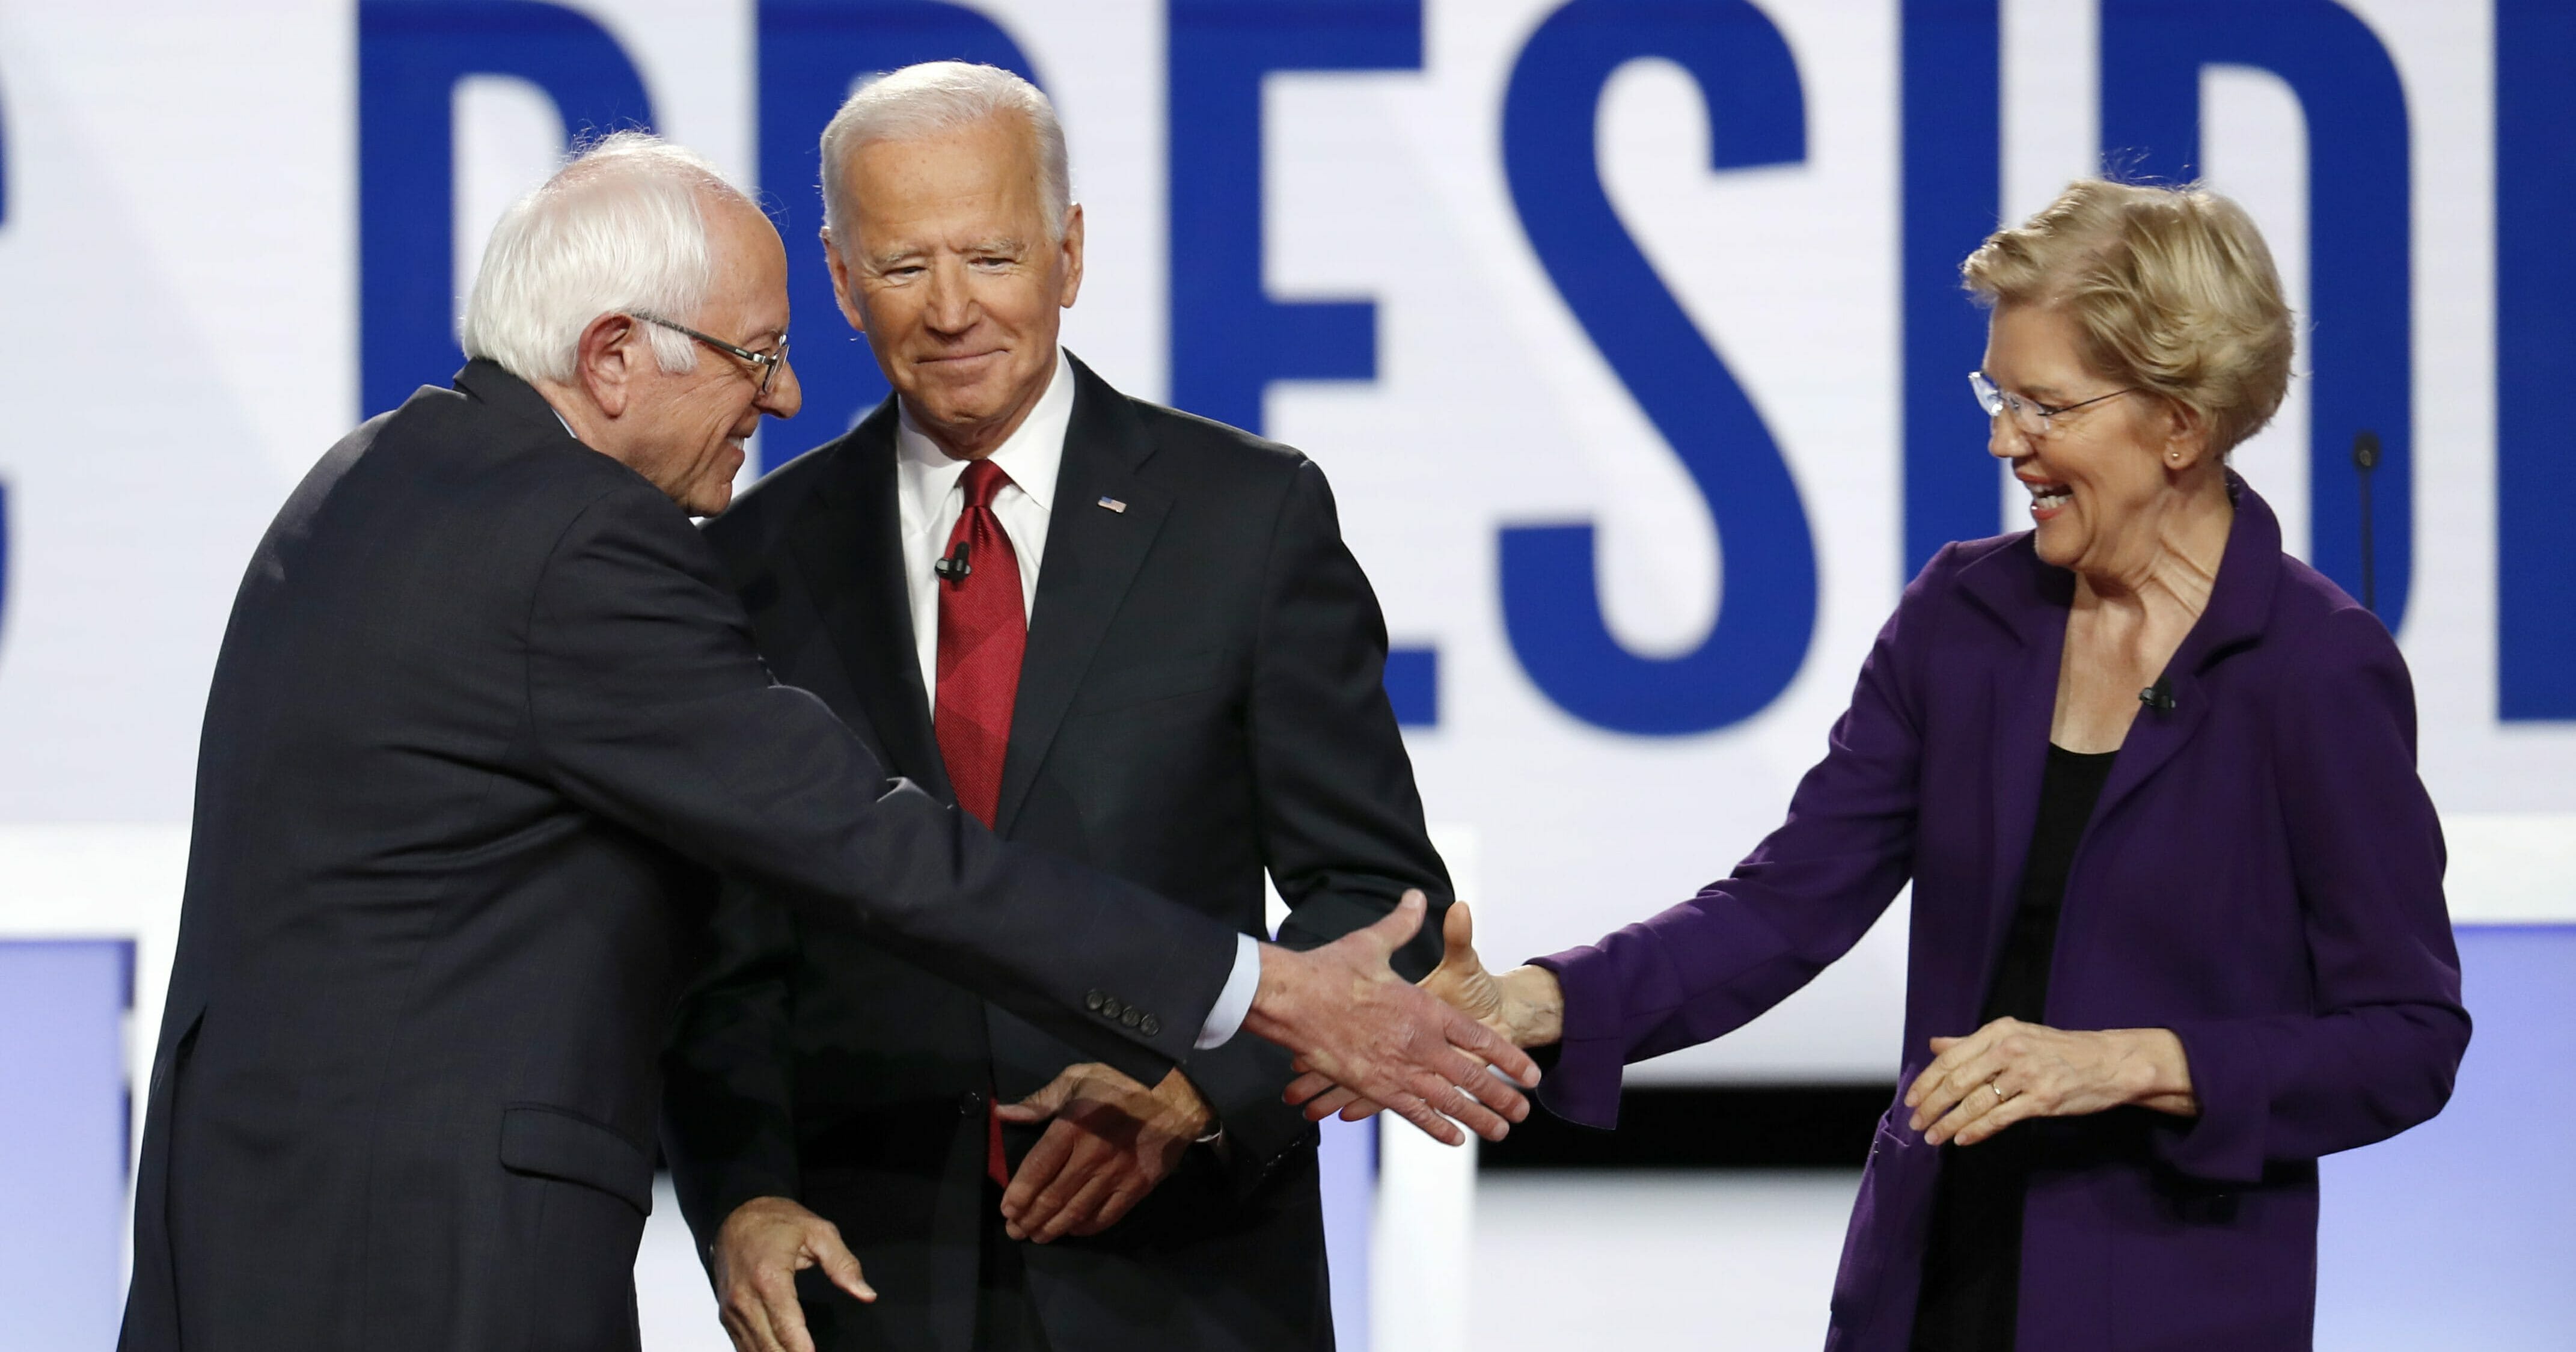 Democratic presidential candidate Sen. Bernie Sanders, I-Vt., left, former Vice President Joe Biden and Sen. Elizabeth Warren, D-Mass., right, participate in a Democratic presidential primary debate hosted by CNN/New York Times at Otterbein University, Tuesday, Oct. 15, 2019, in Westerville, Ohio.